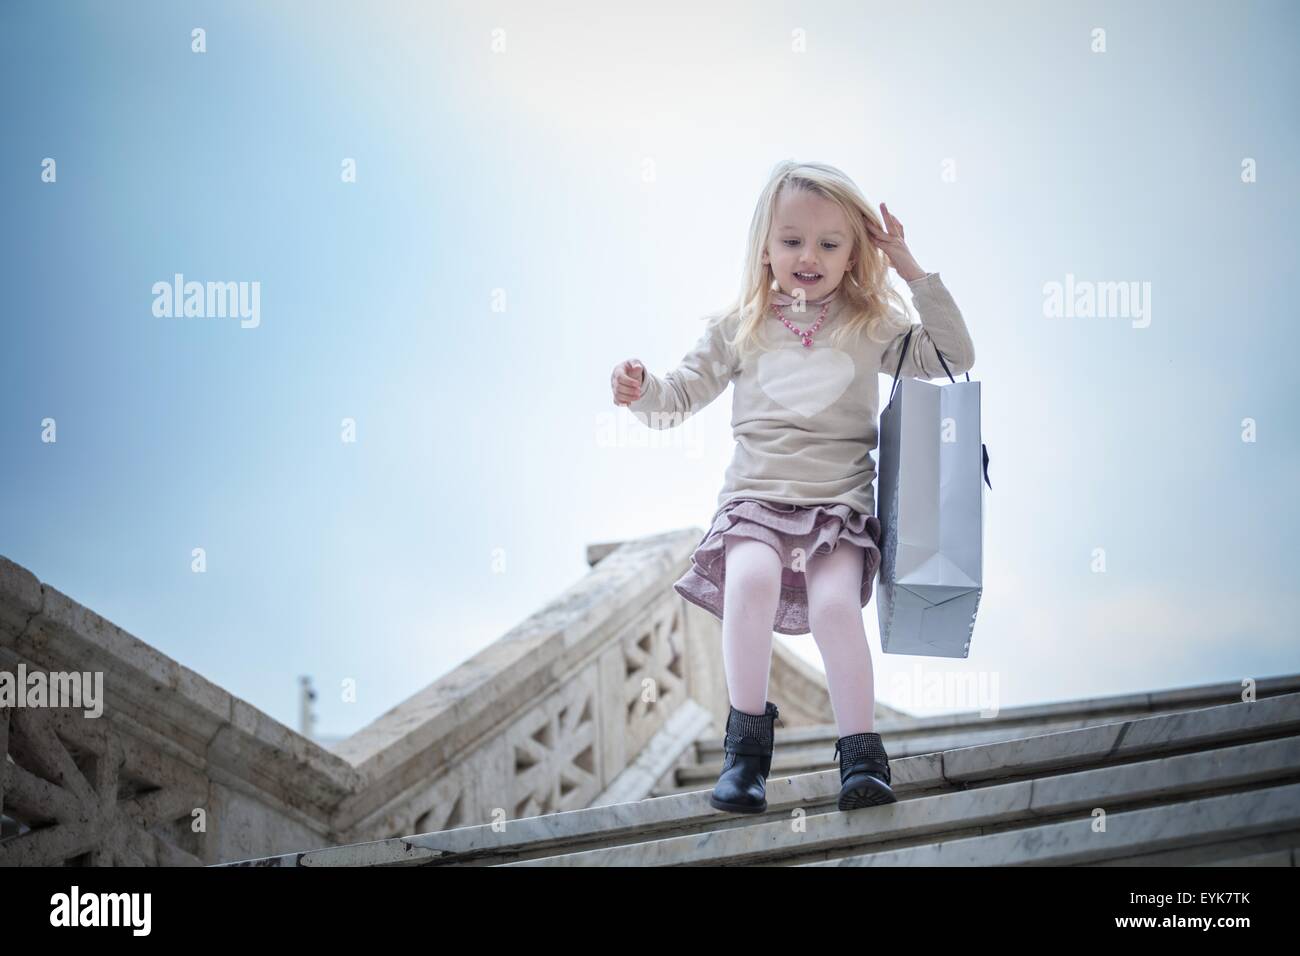 Young girl running down stairway carrying shopping bag, Cagliari, Sardinia, Italy Stock Photo